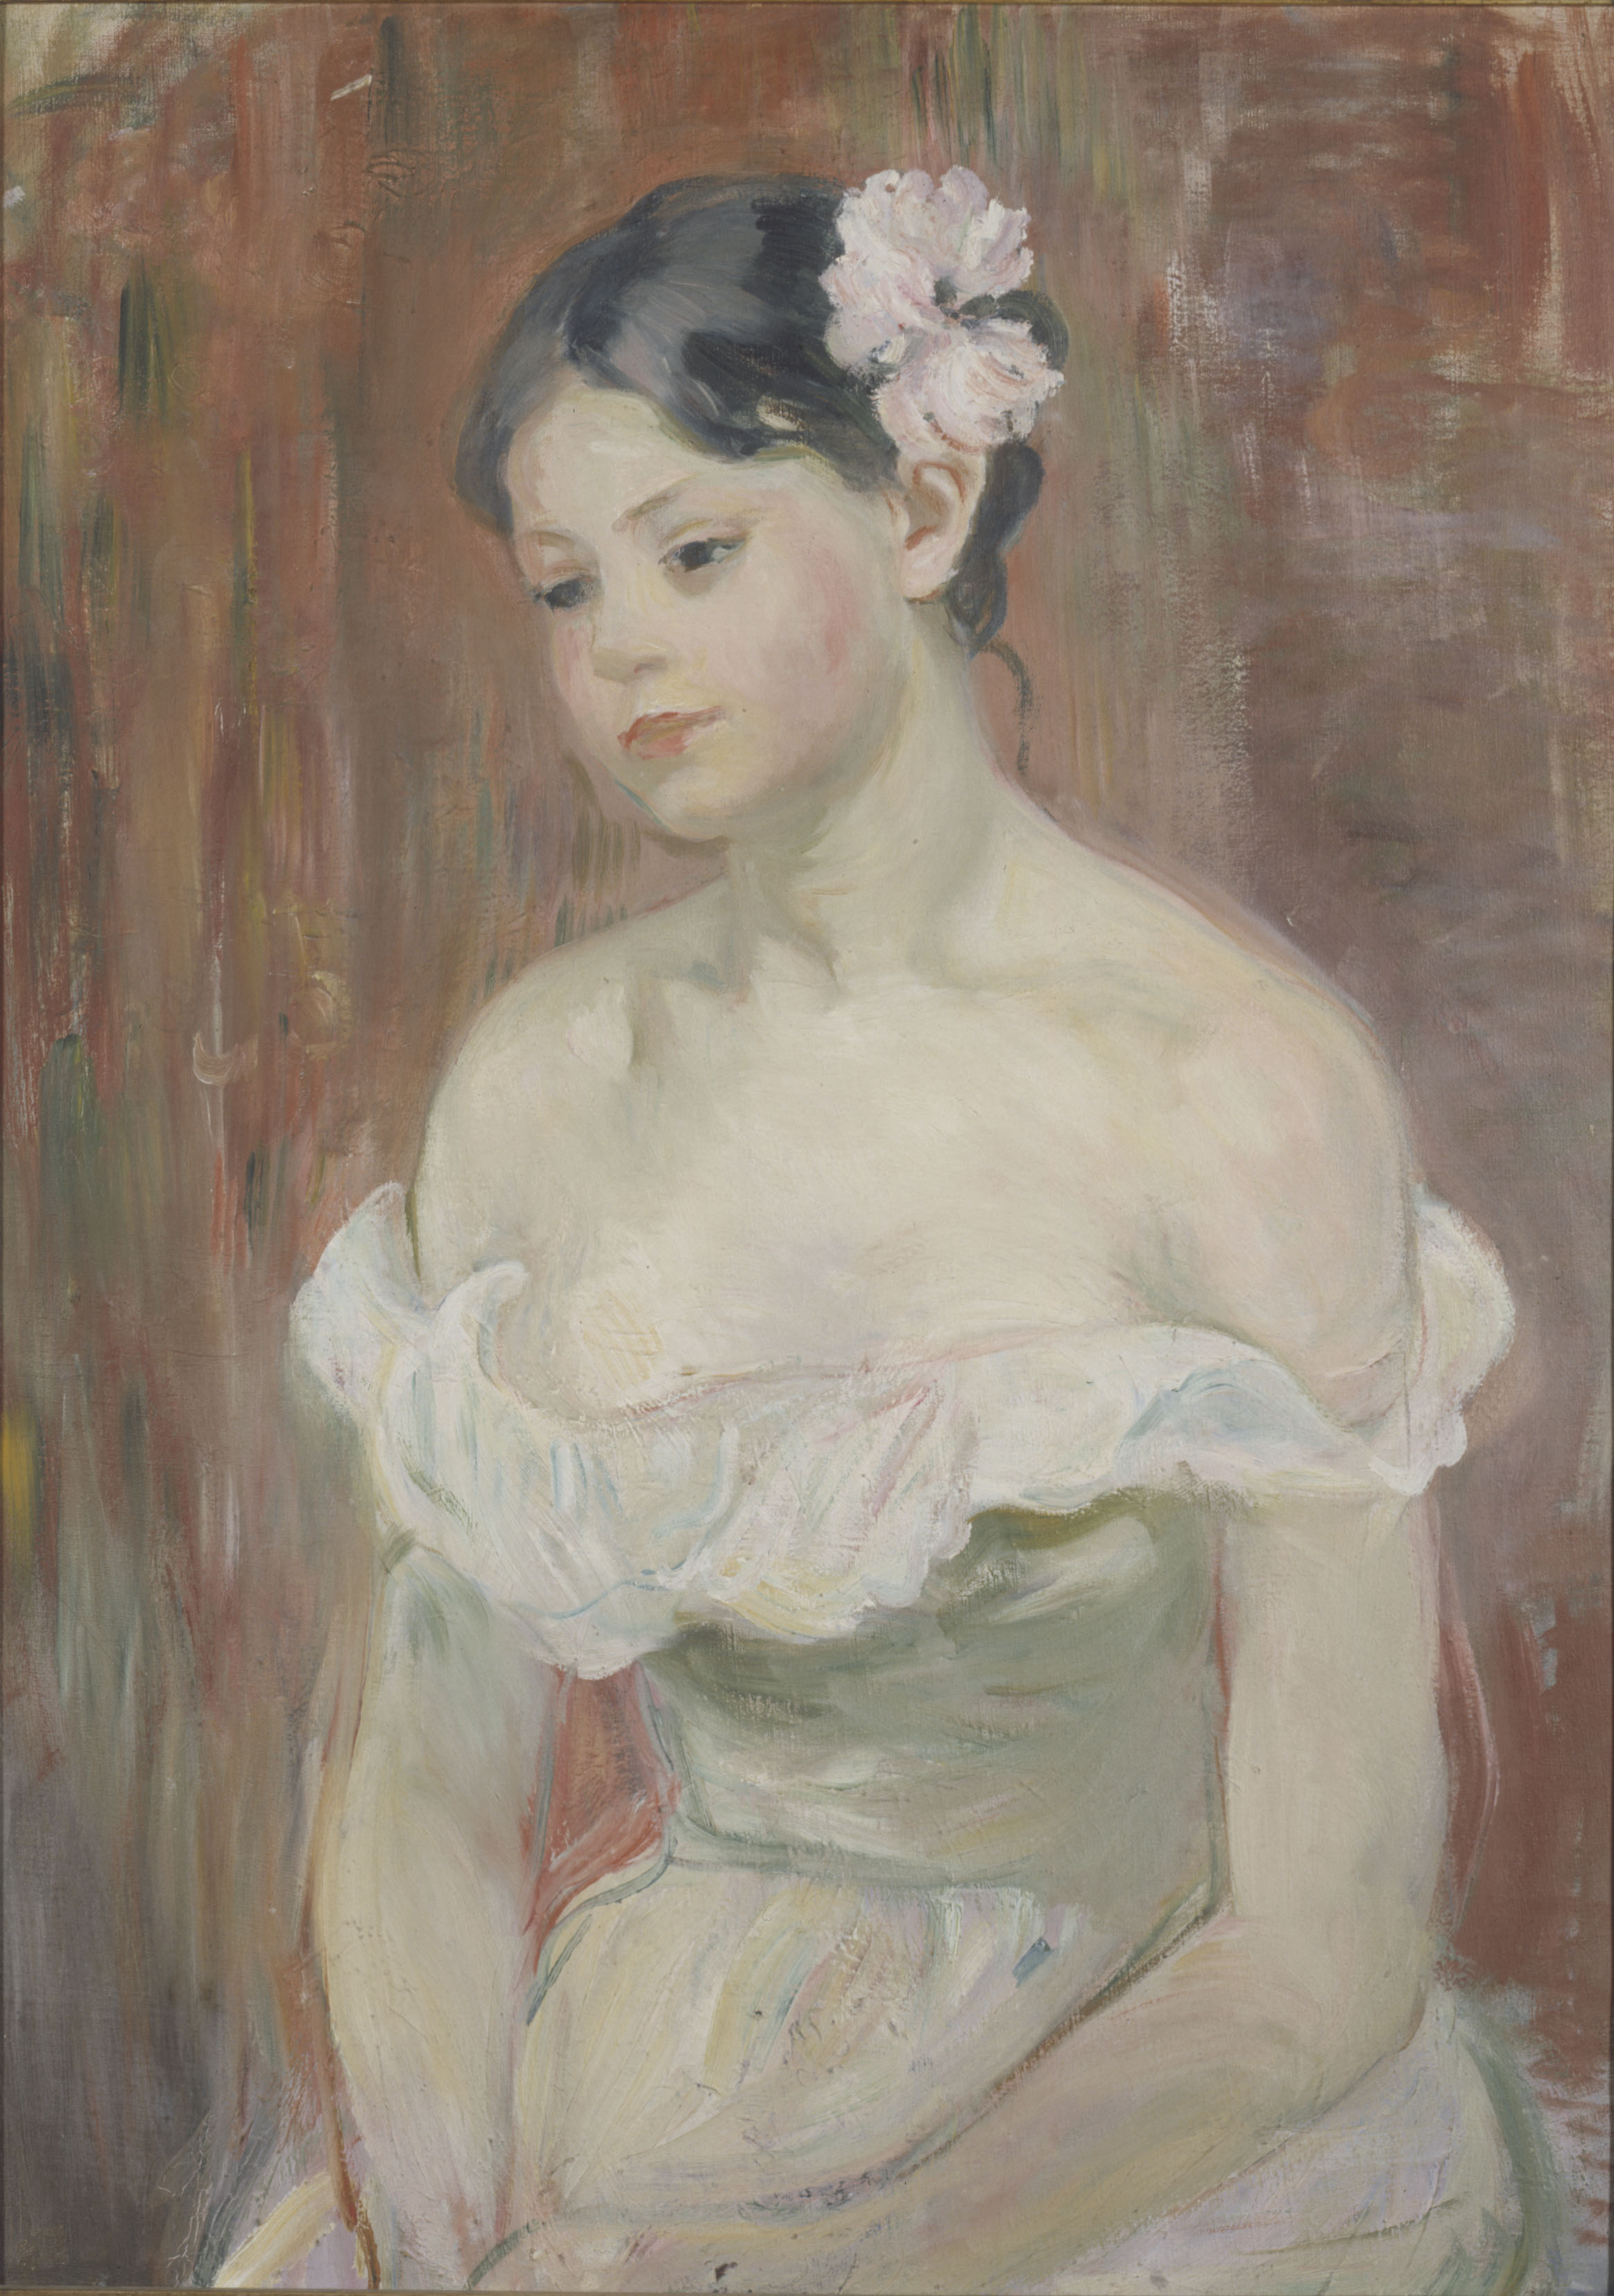 Young Girl in a Low Cut Dress with a Flower in her Hair by Berthe Morisot - 1893 - 70 x 51.5 cm Petit Palais